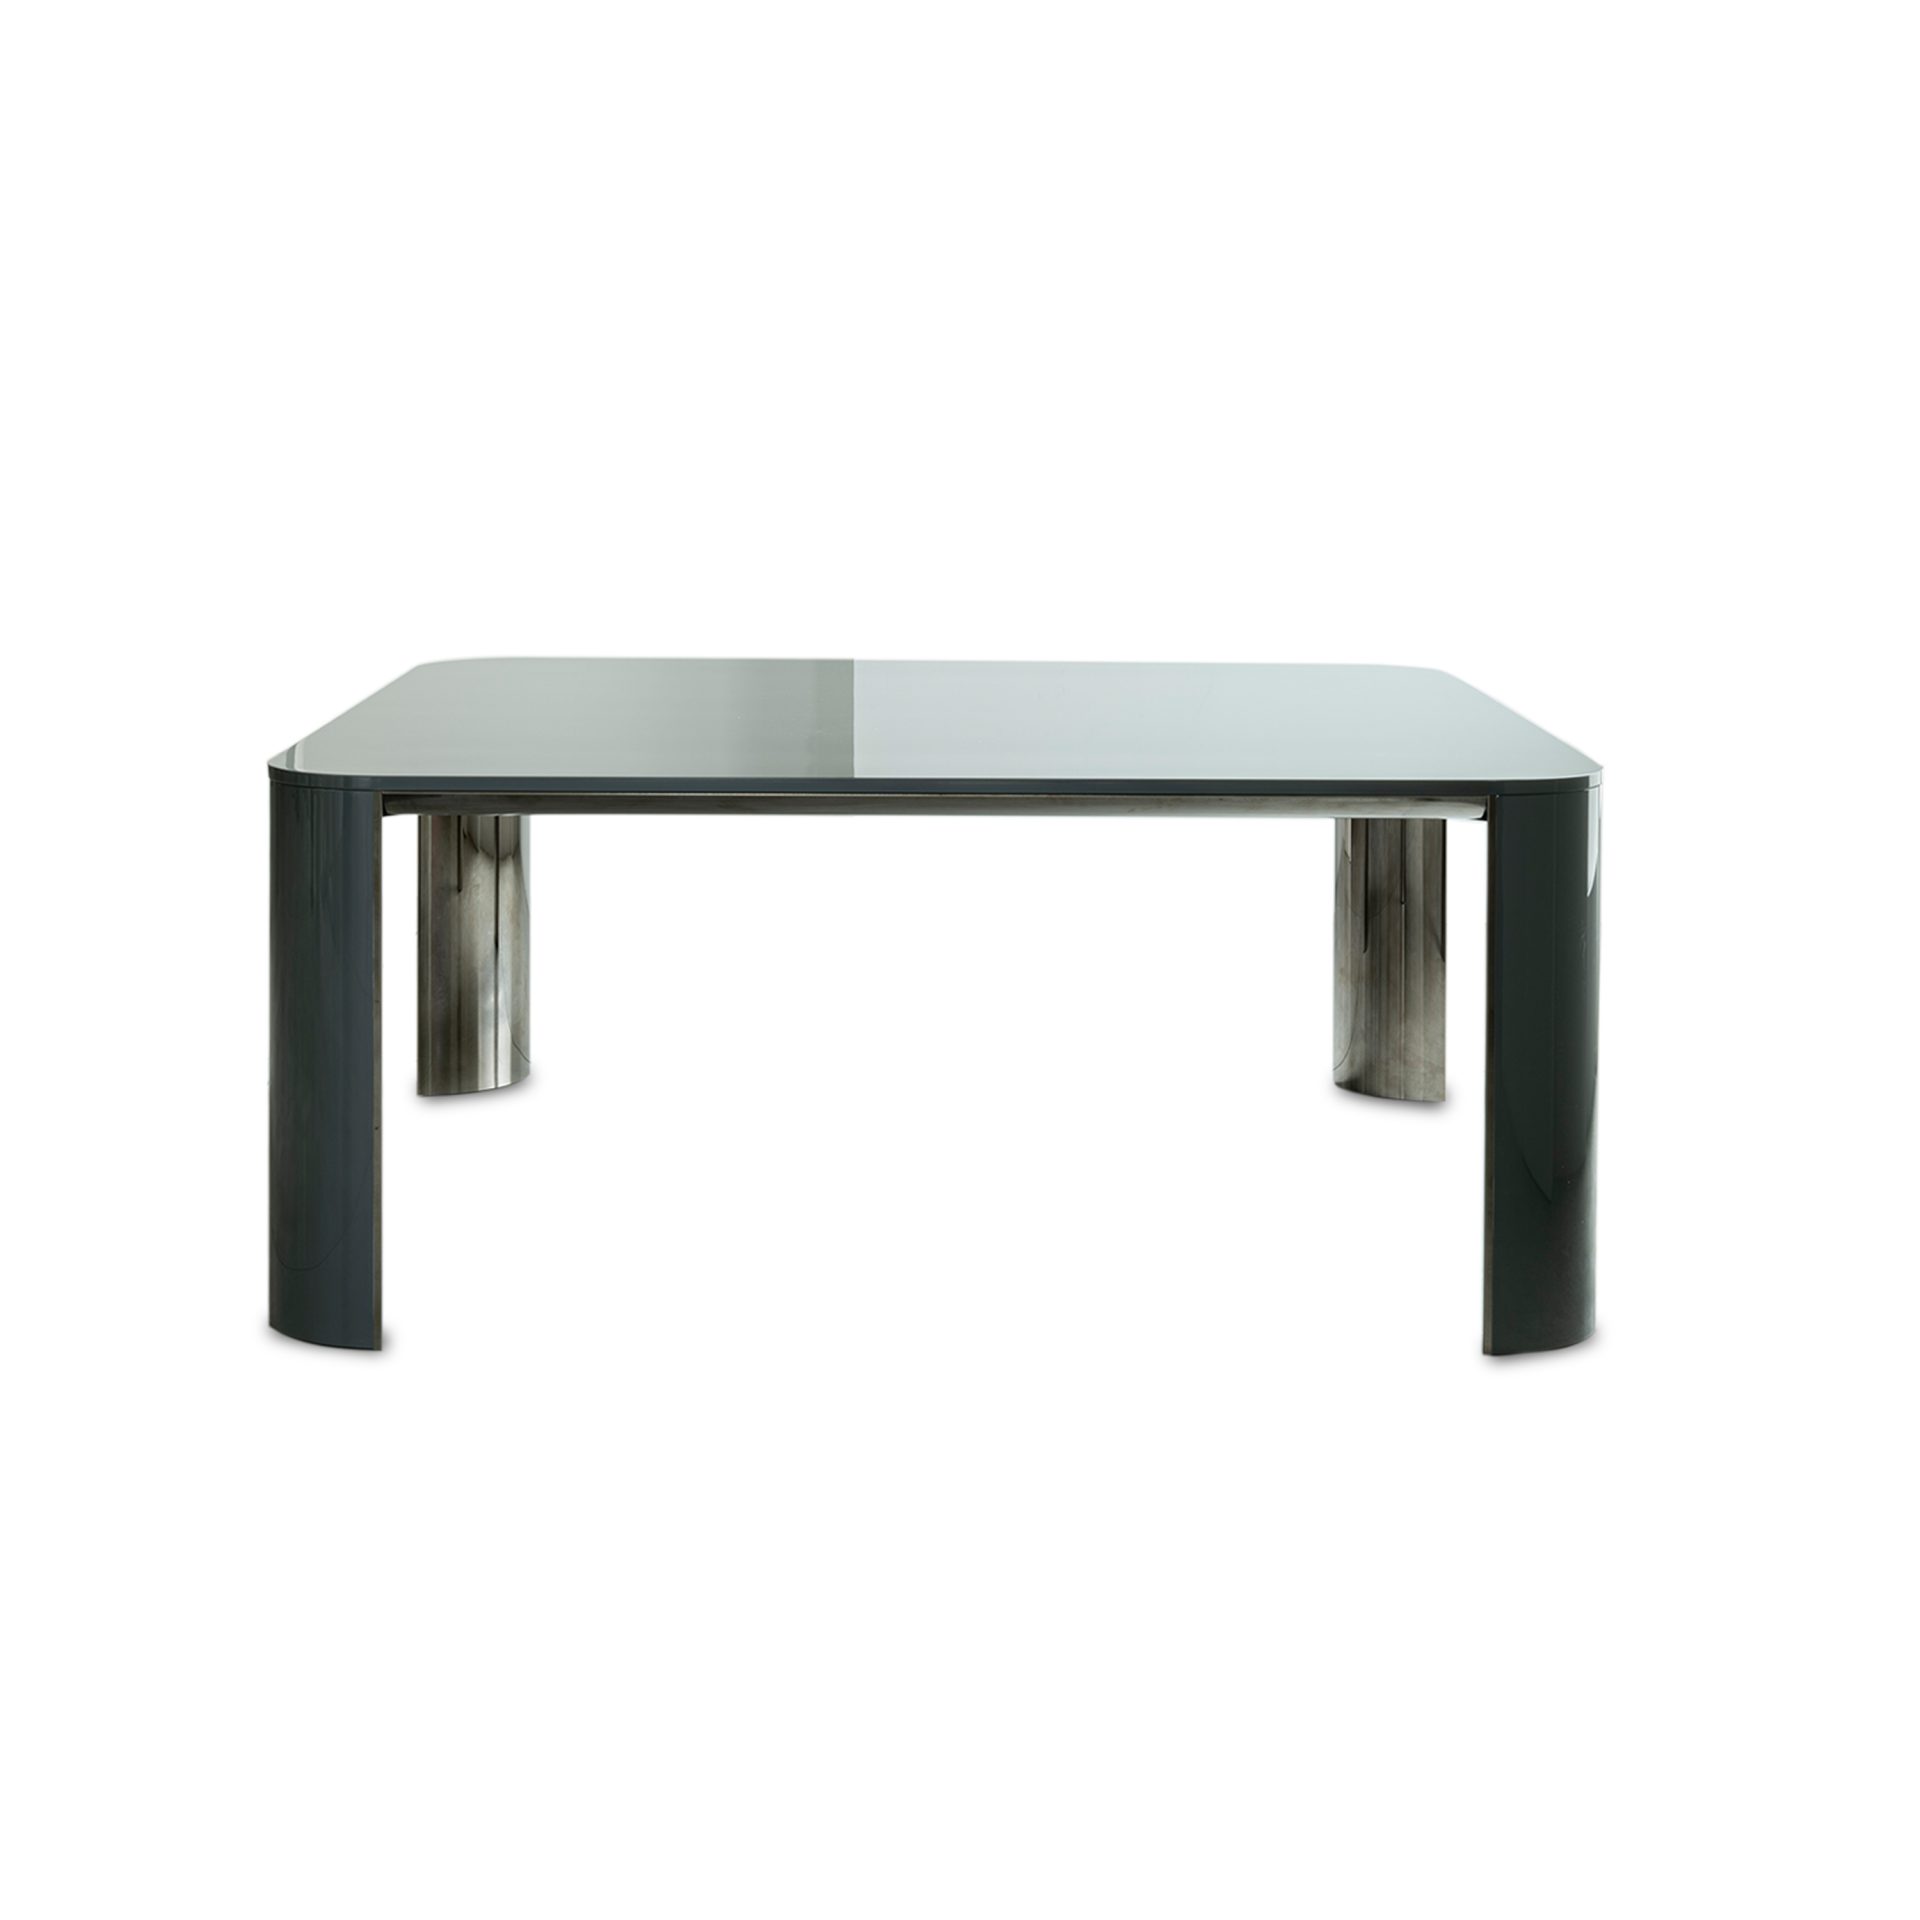 Eye Square Dining Table